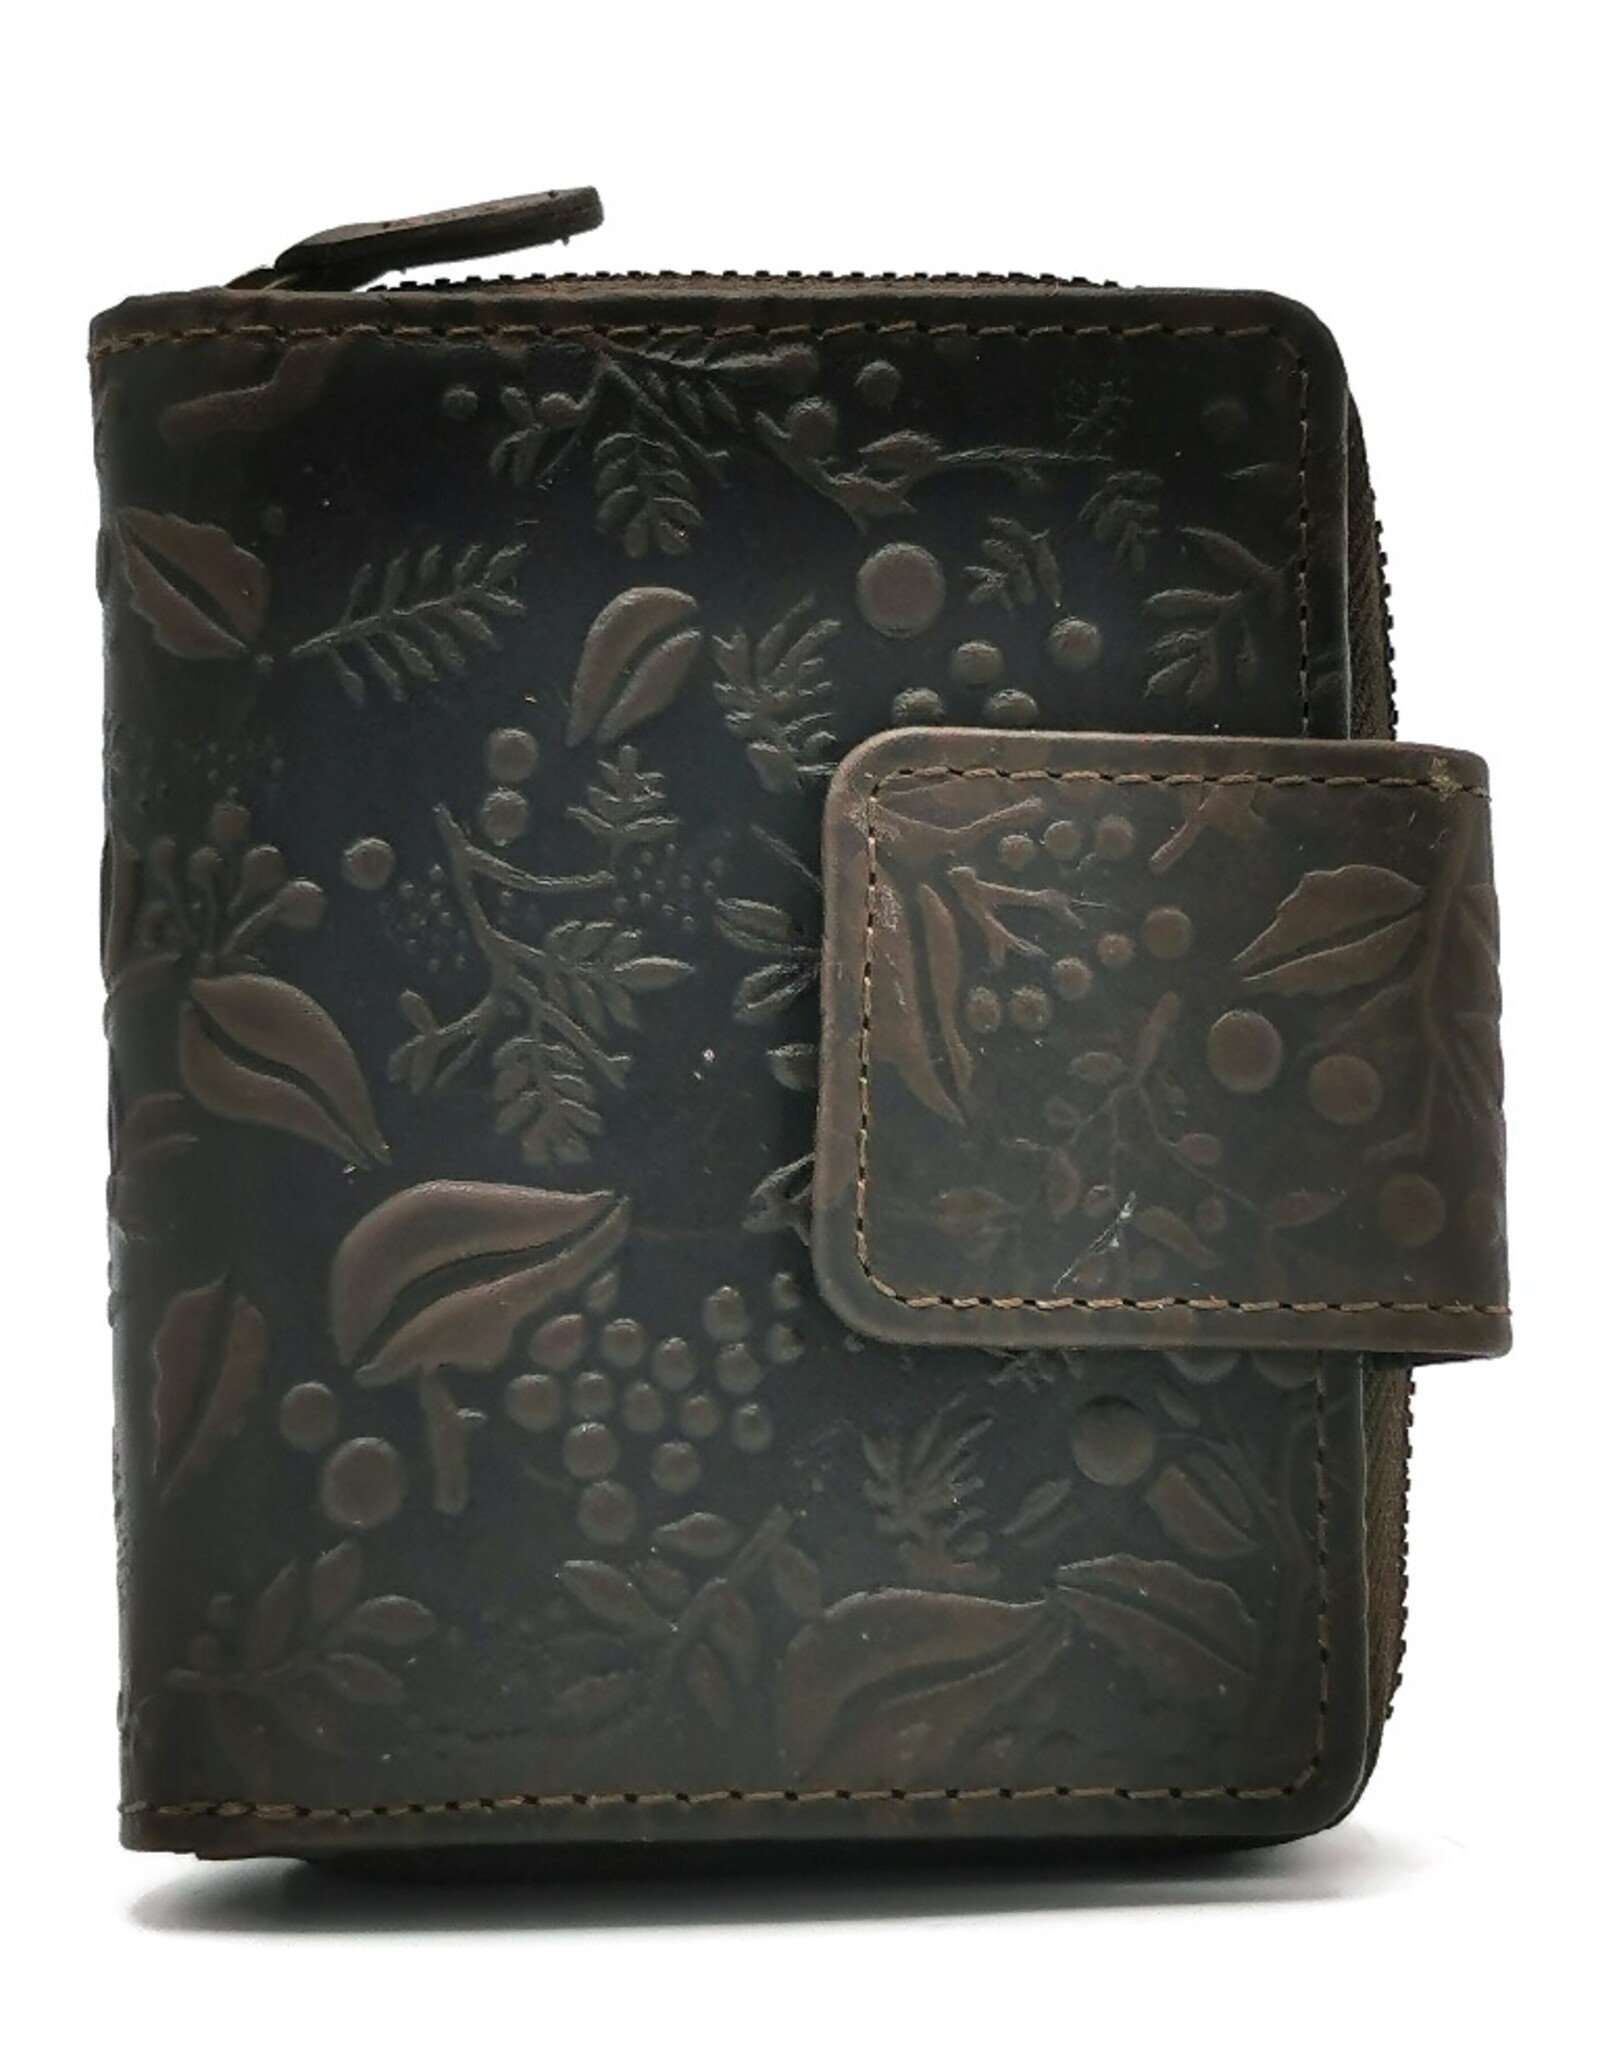 HillBurry Leather wallets - HillBurry Leather Wallet with Embossed Flowers Brown